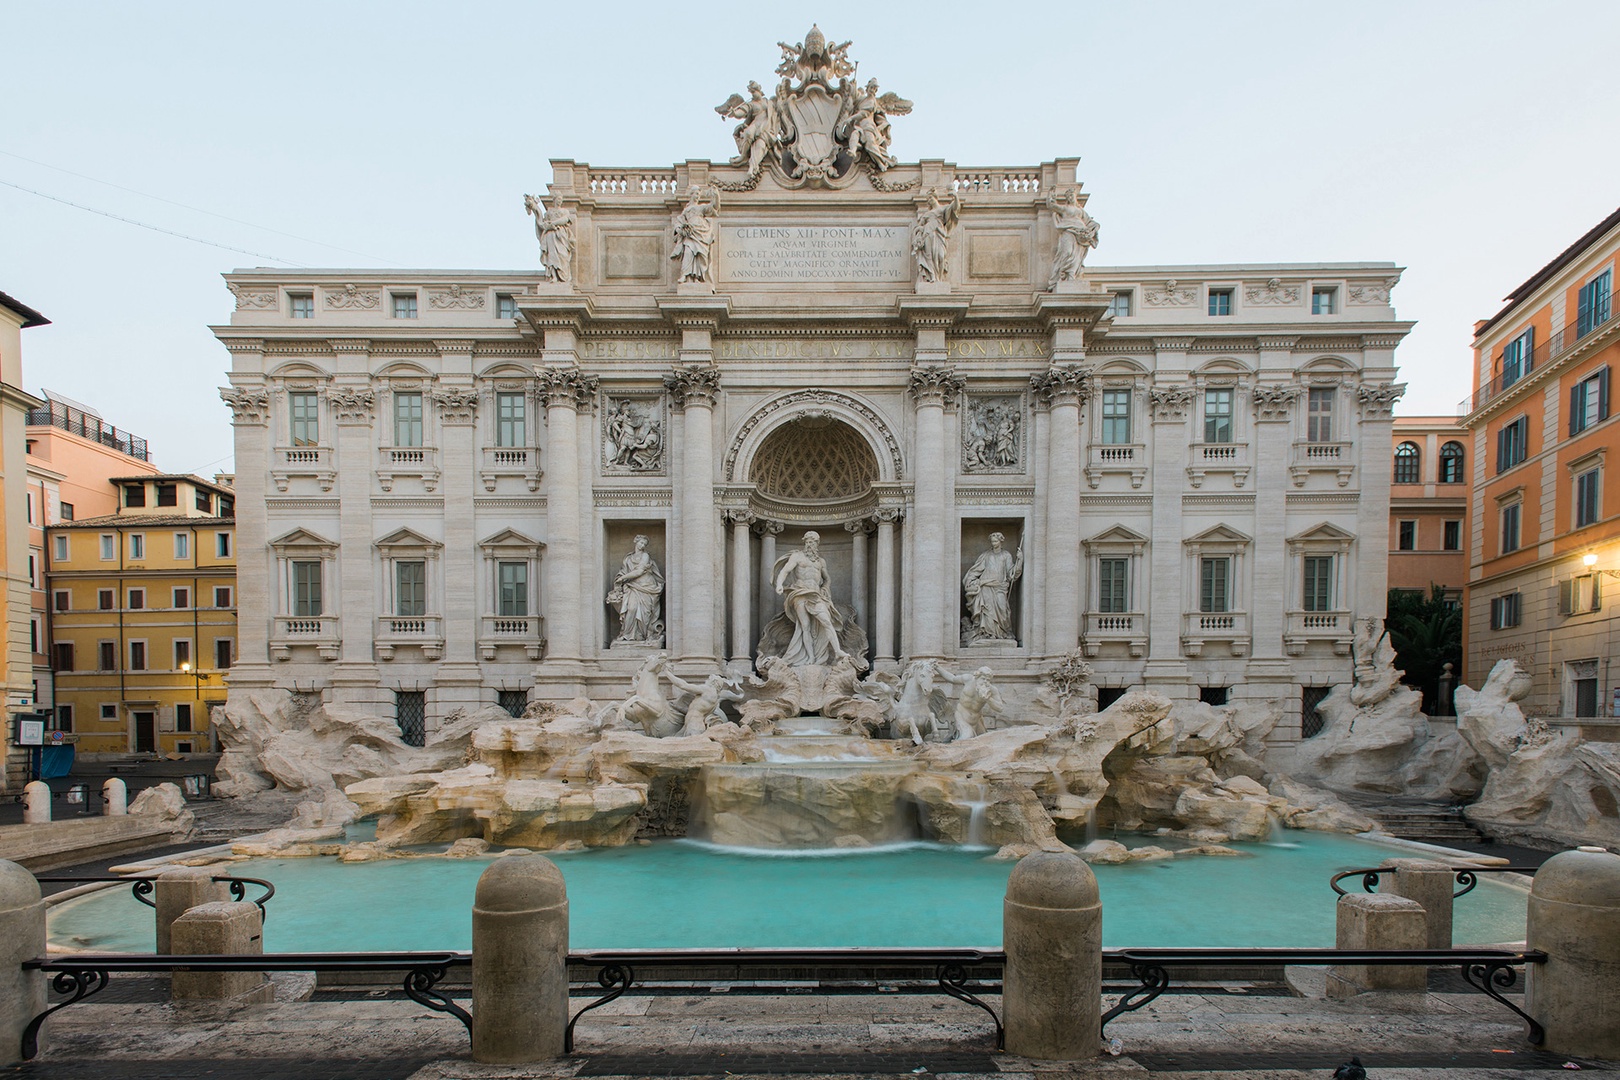 The Trevi Fountain is a 3 minute walk.